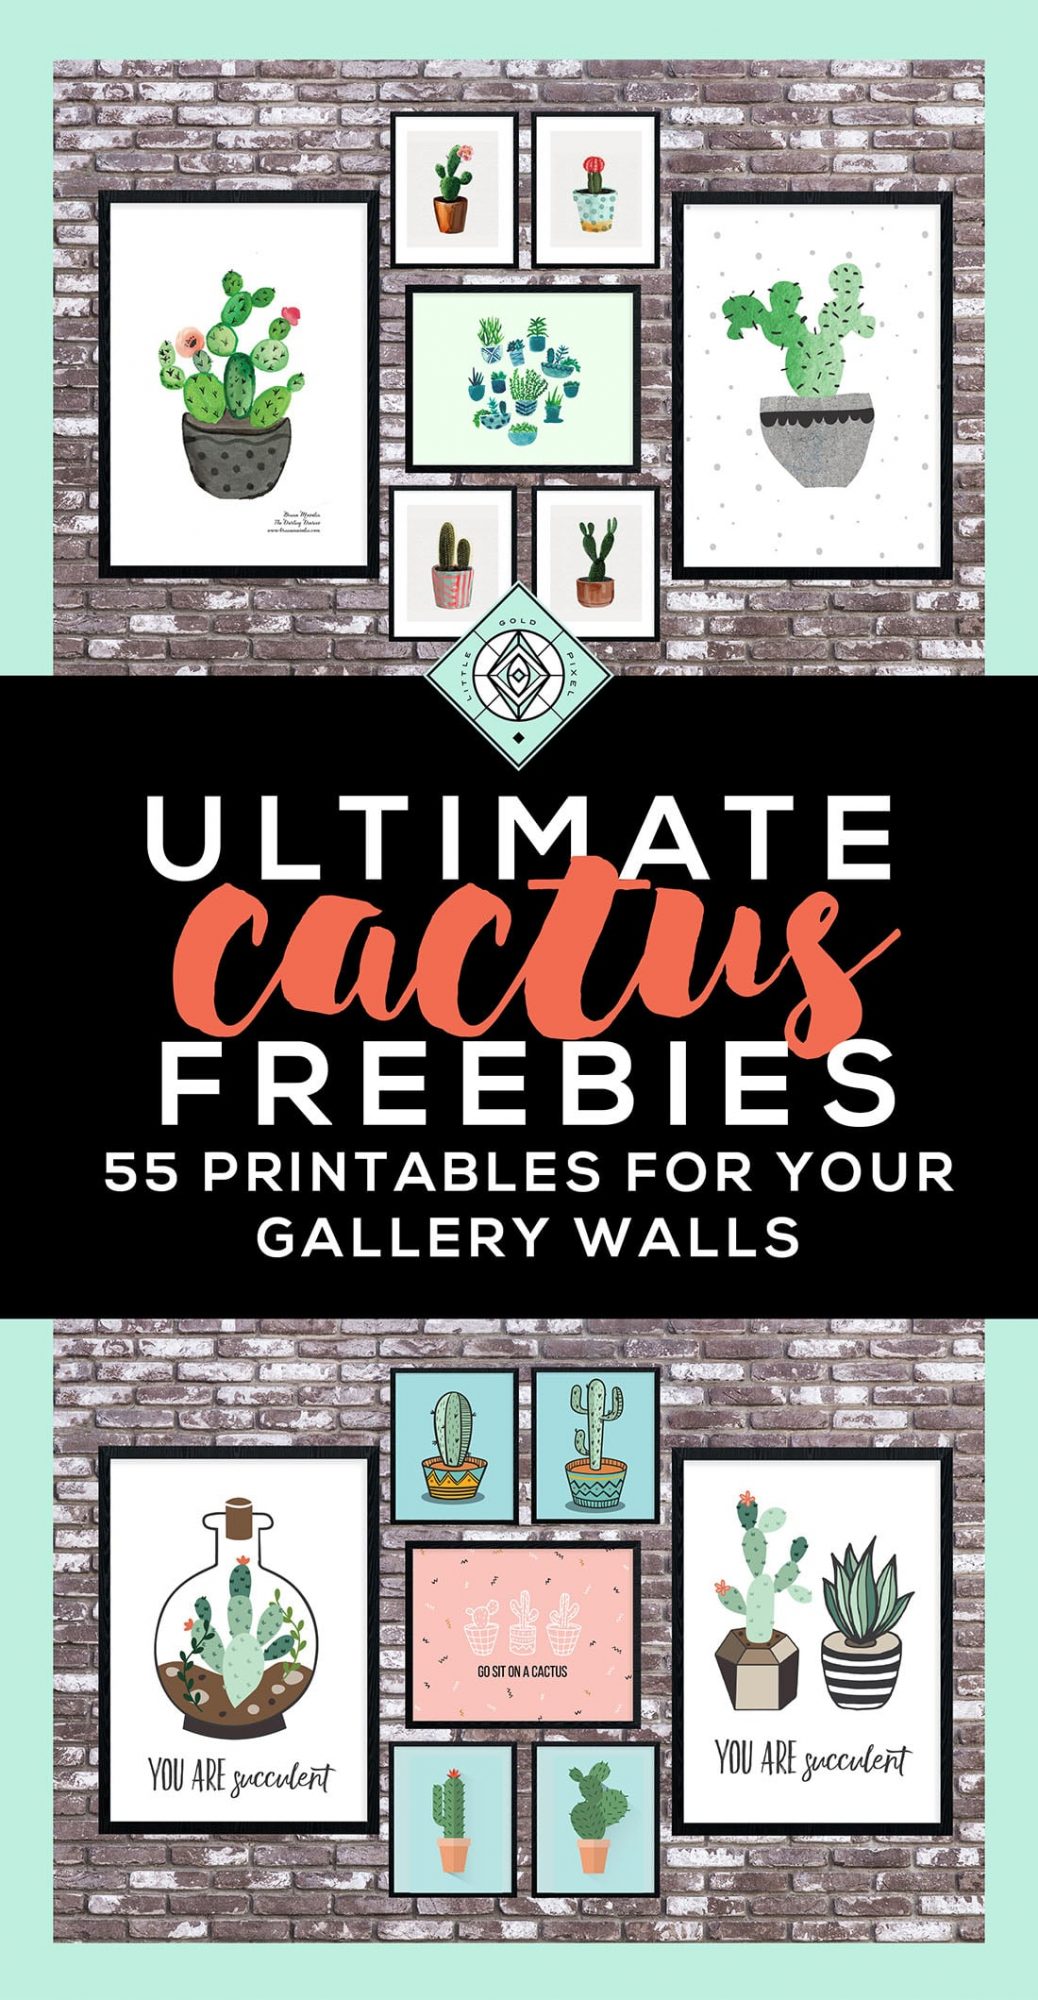 15 Free Gallery Wall Art Roundups to Bookmark • Little Gold Pixel • In which I share 15 free gallery wall art roundups that you can bookmark and share to create easy themed wall art throughout your home.